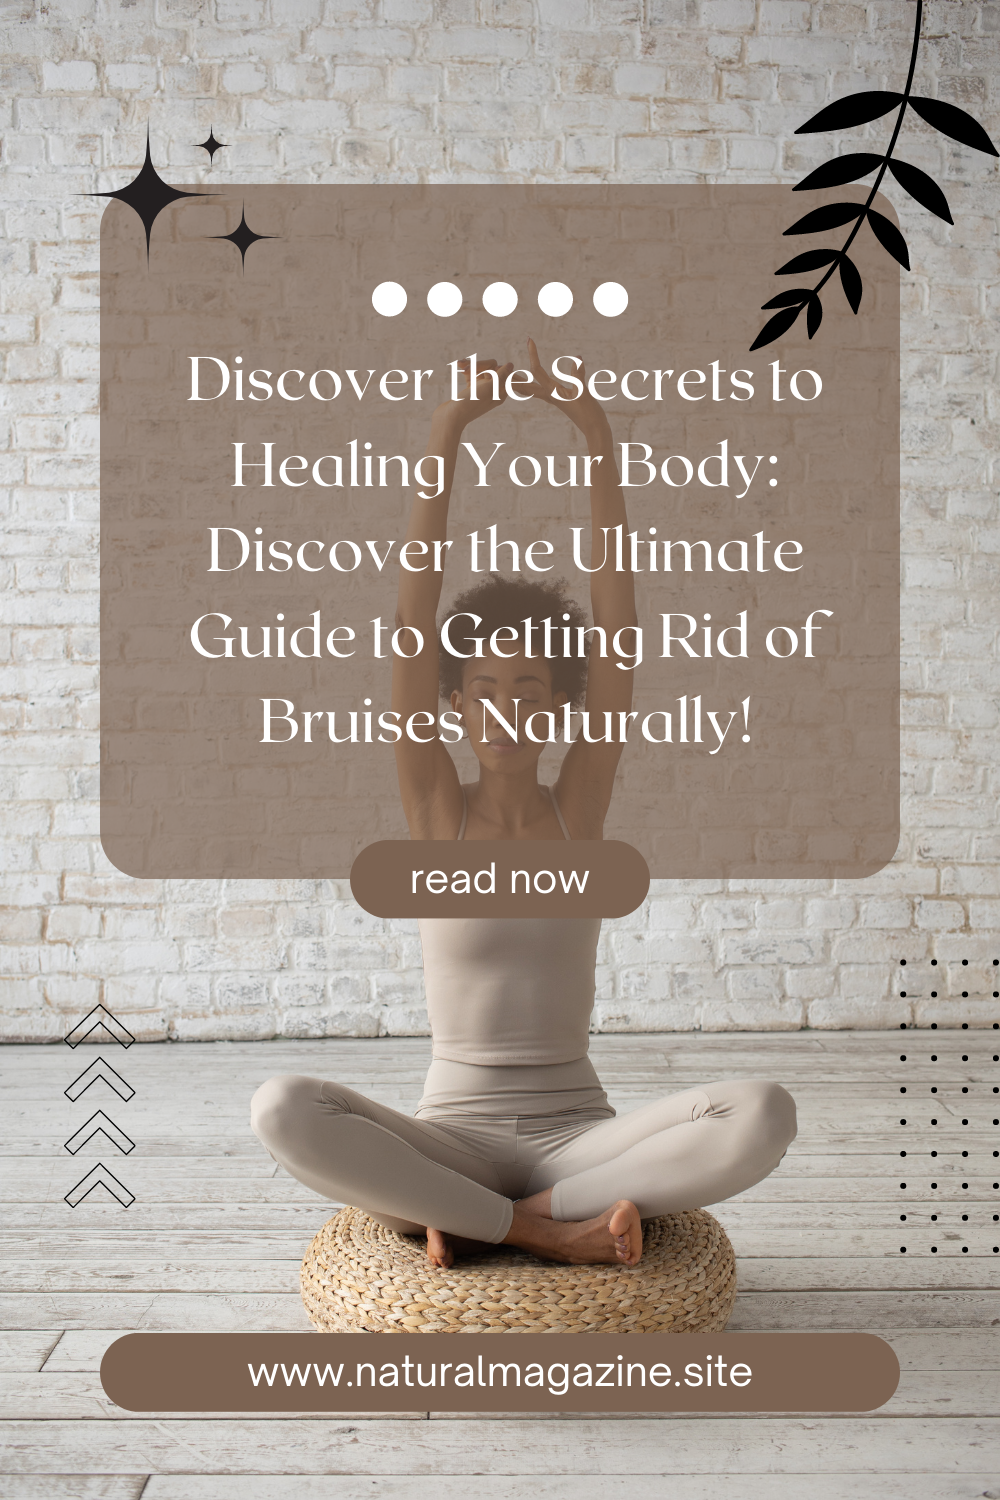 Discover the Secrets to Healing Your Body: Discover the Ultimate Guide to Getting Rid of Bruises Naturally!